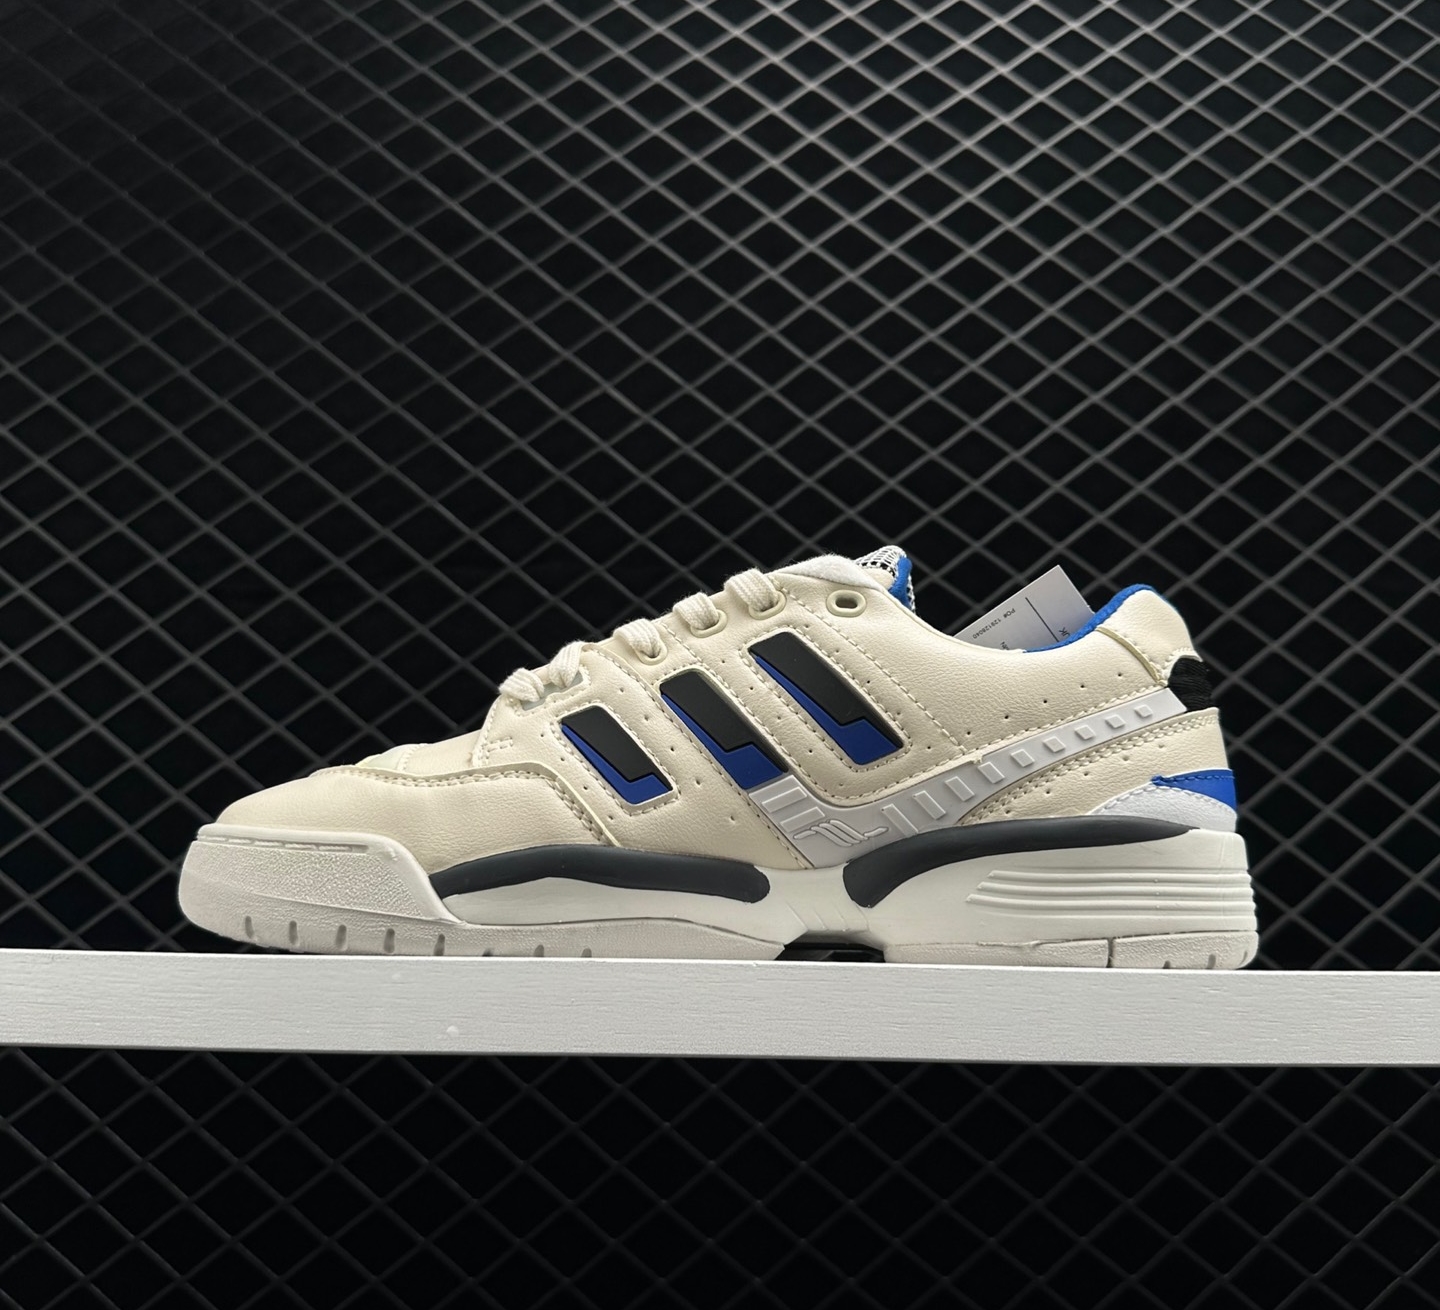 Adidas Originals TORSION COMP White Blue EE7377 - Stylish and Comfortable Sneakers